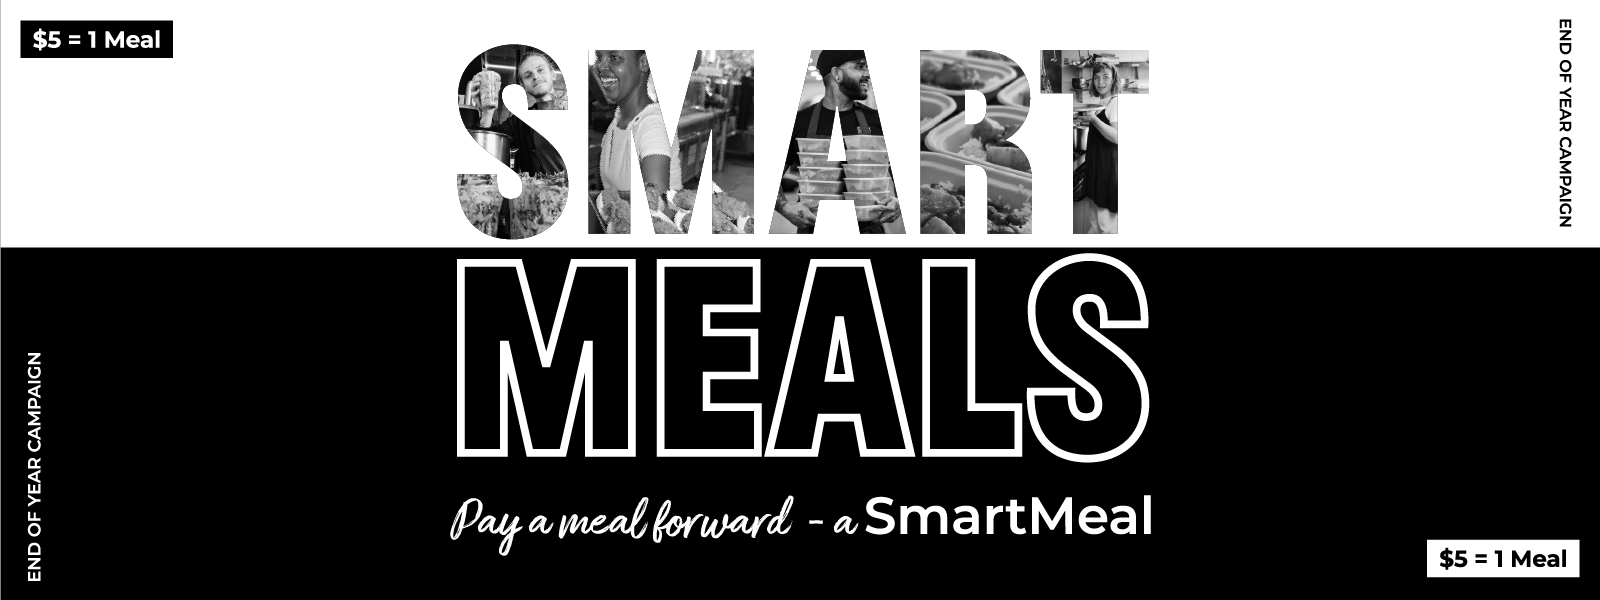 Pay it forward - a SmartMeal End of Year Campaign